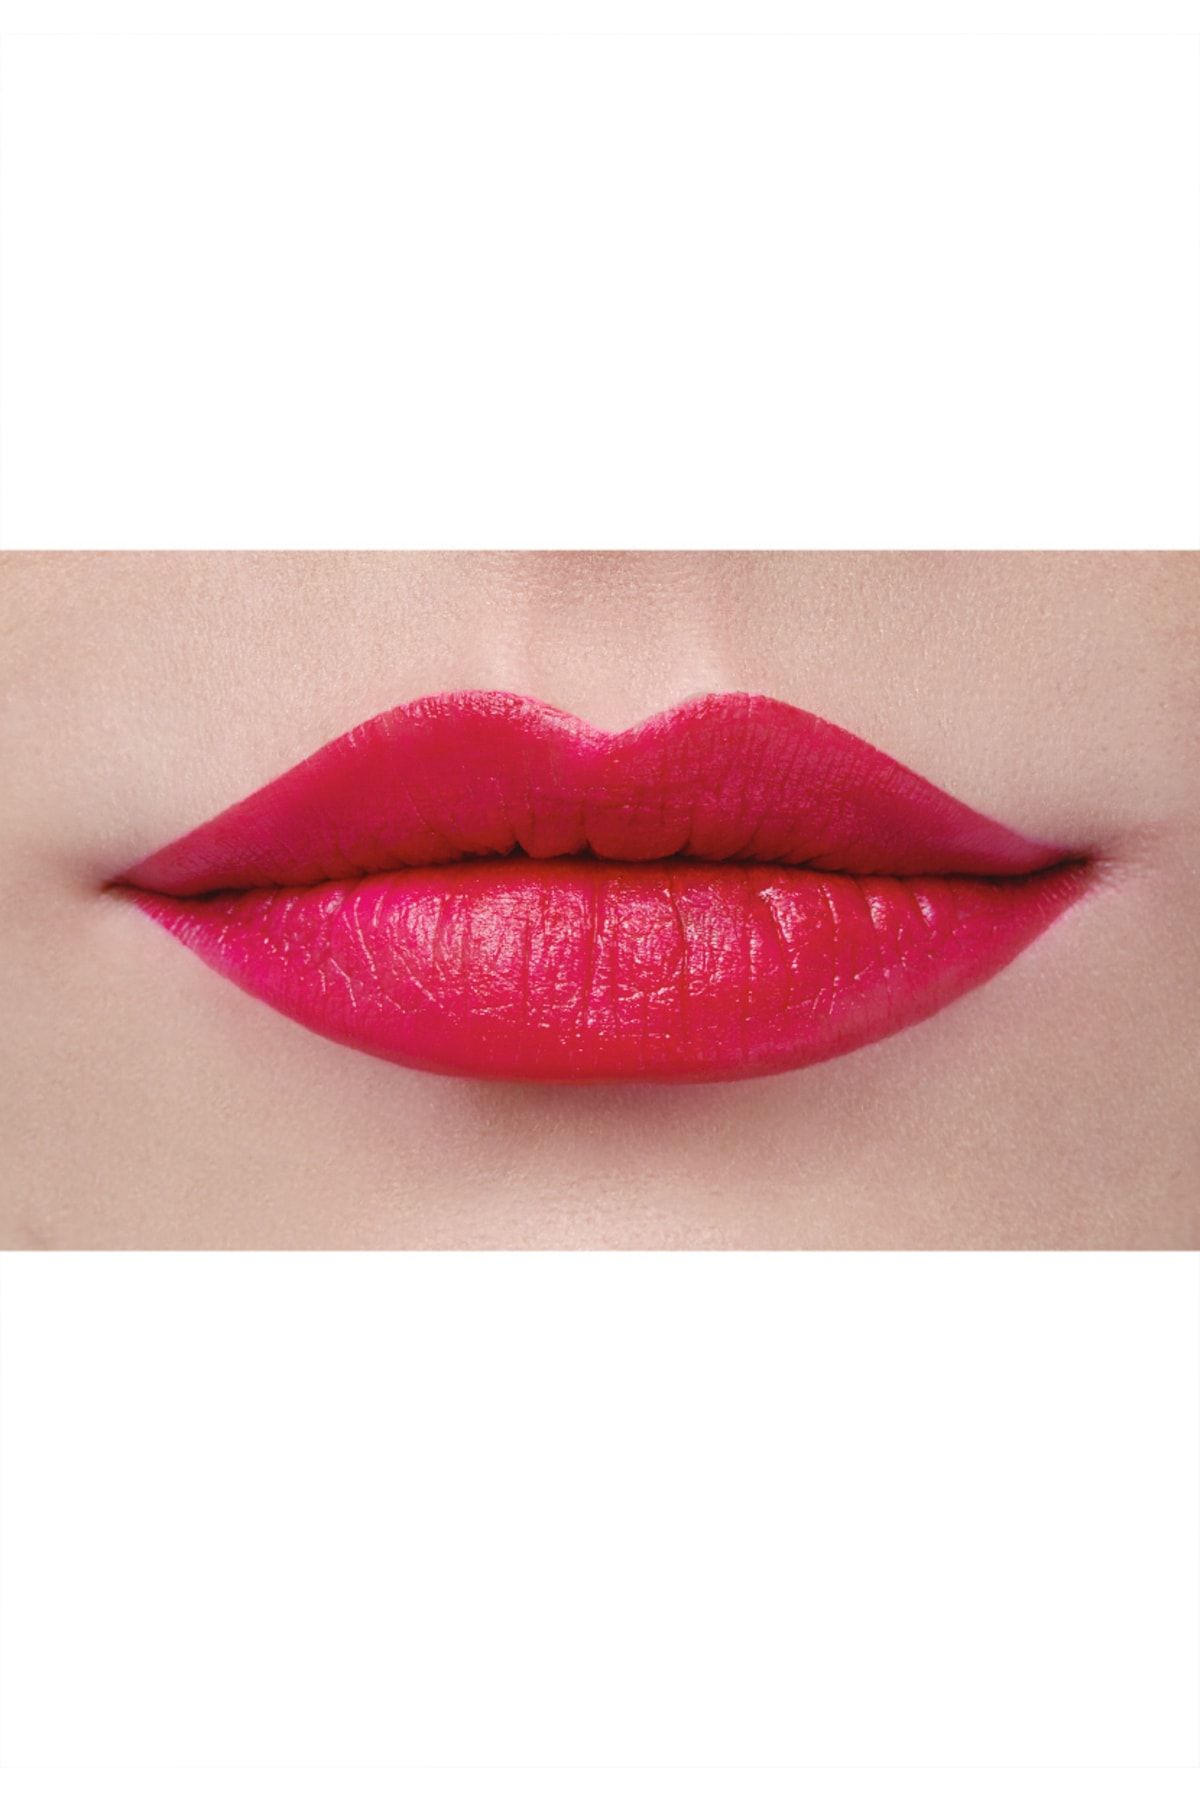 Faberlic Hd Color Lipstick, Shade "love, Pink" - 4.0 Gr.